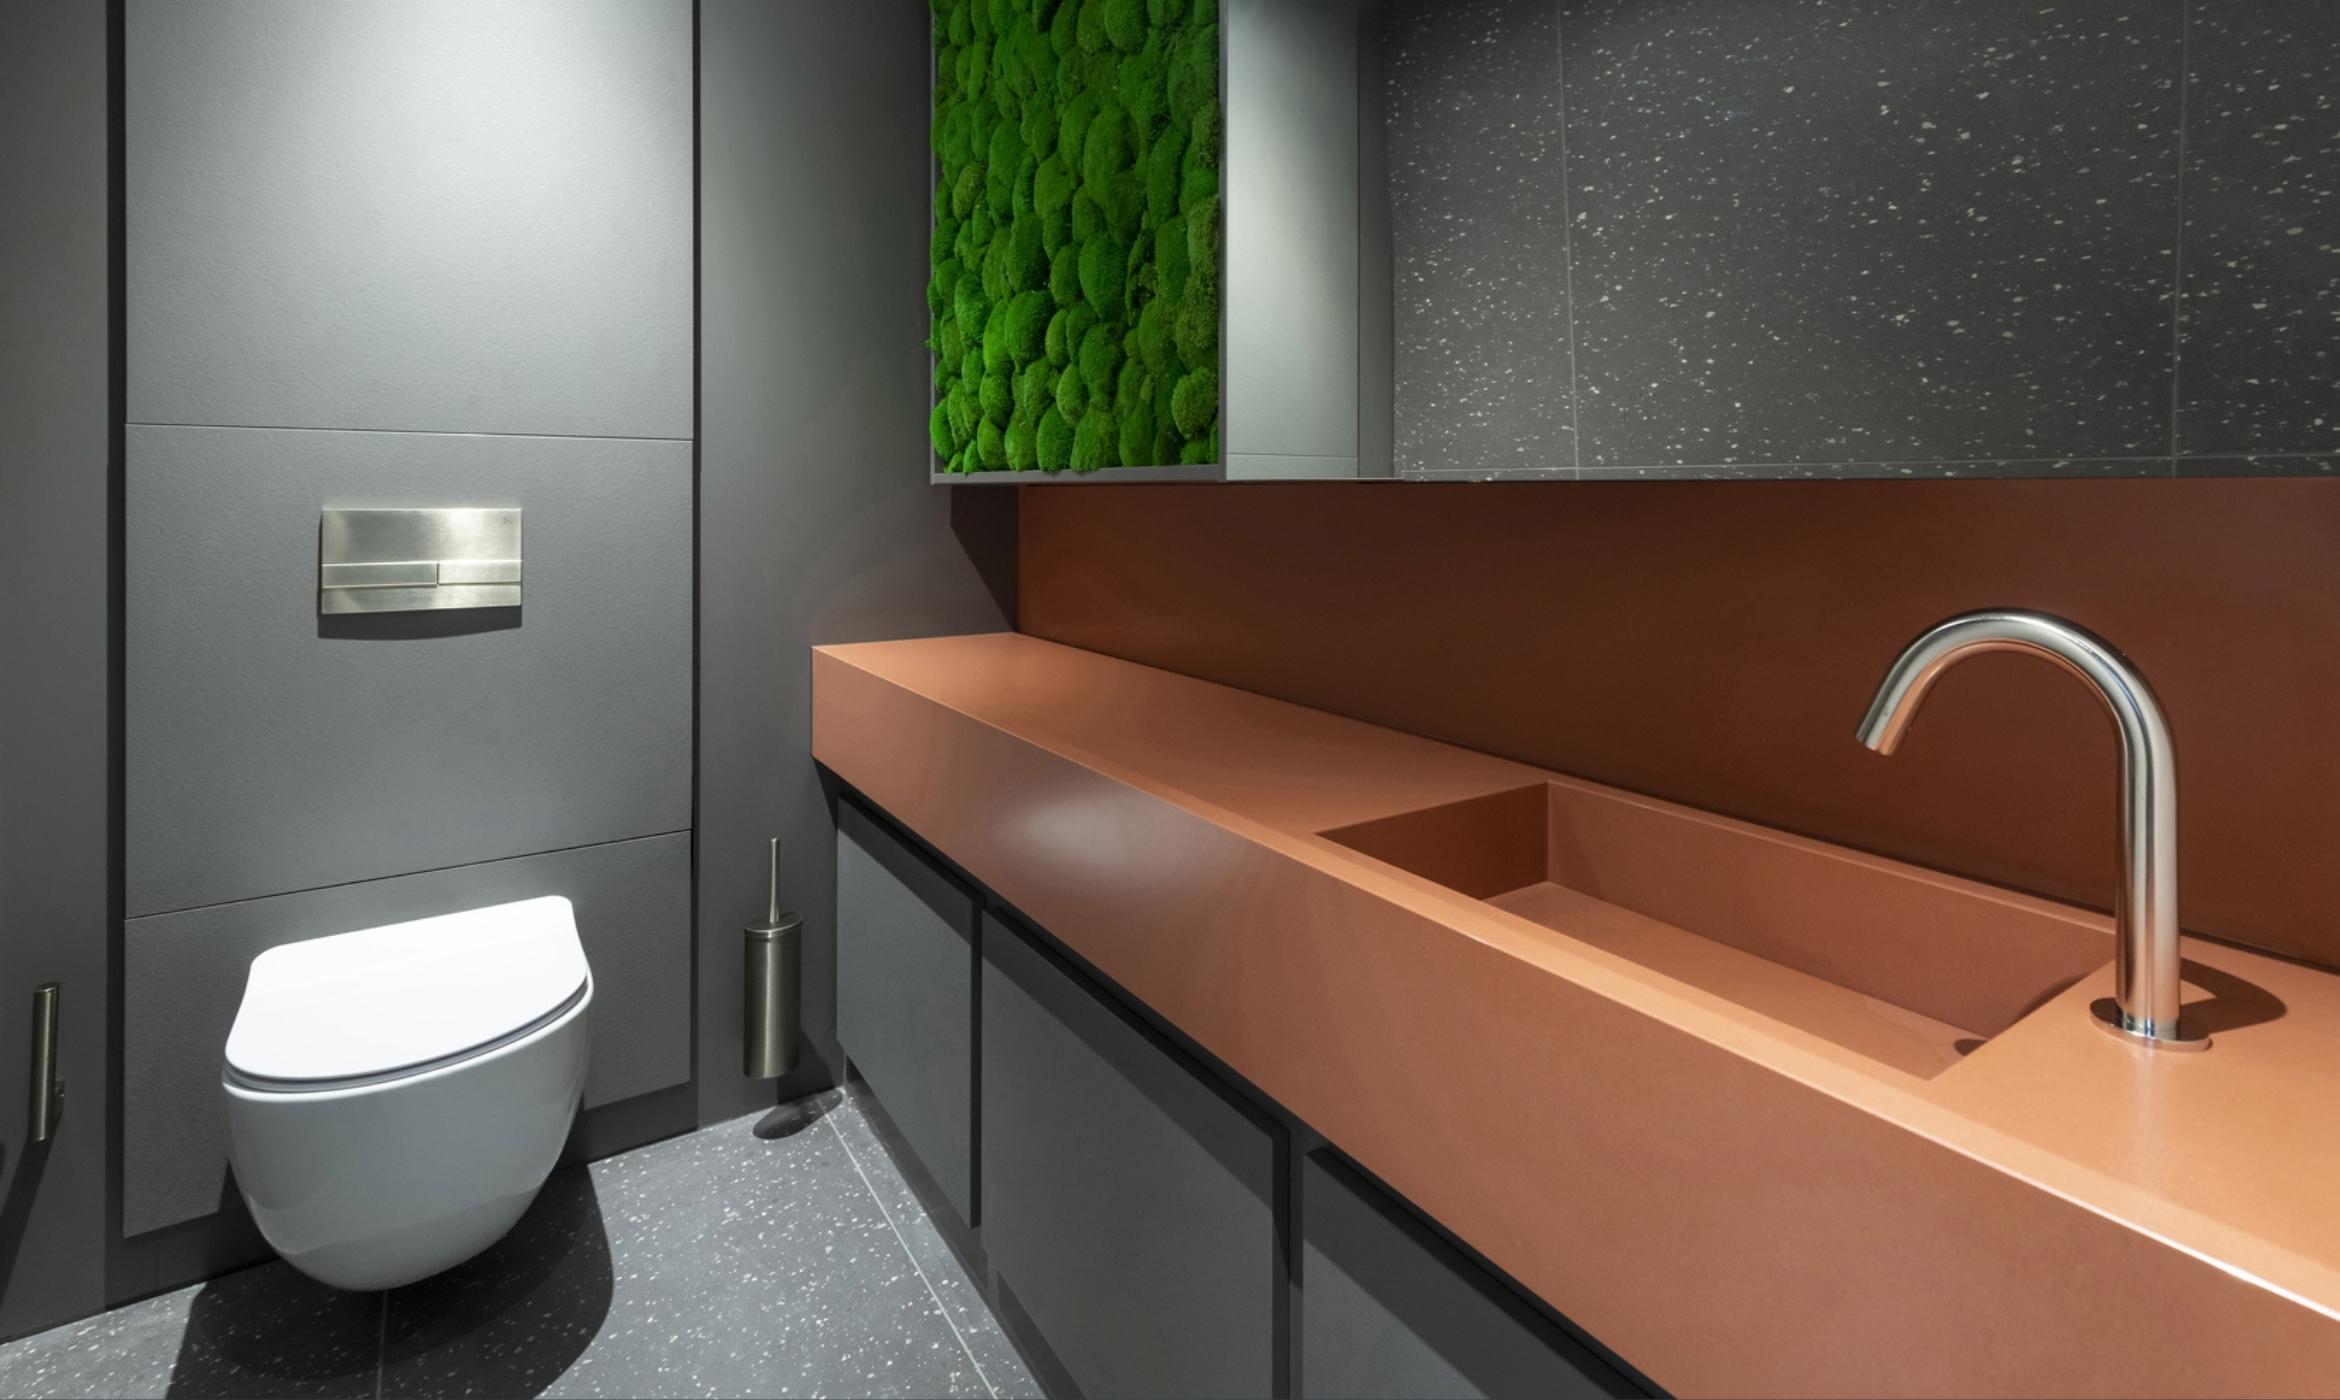 Washroom wellbeing: Why the support of wellness is crucial in commercial washroom design